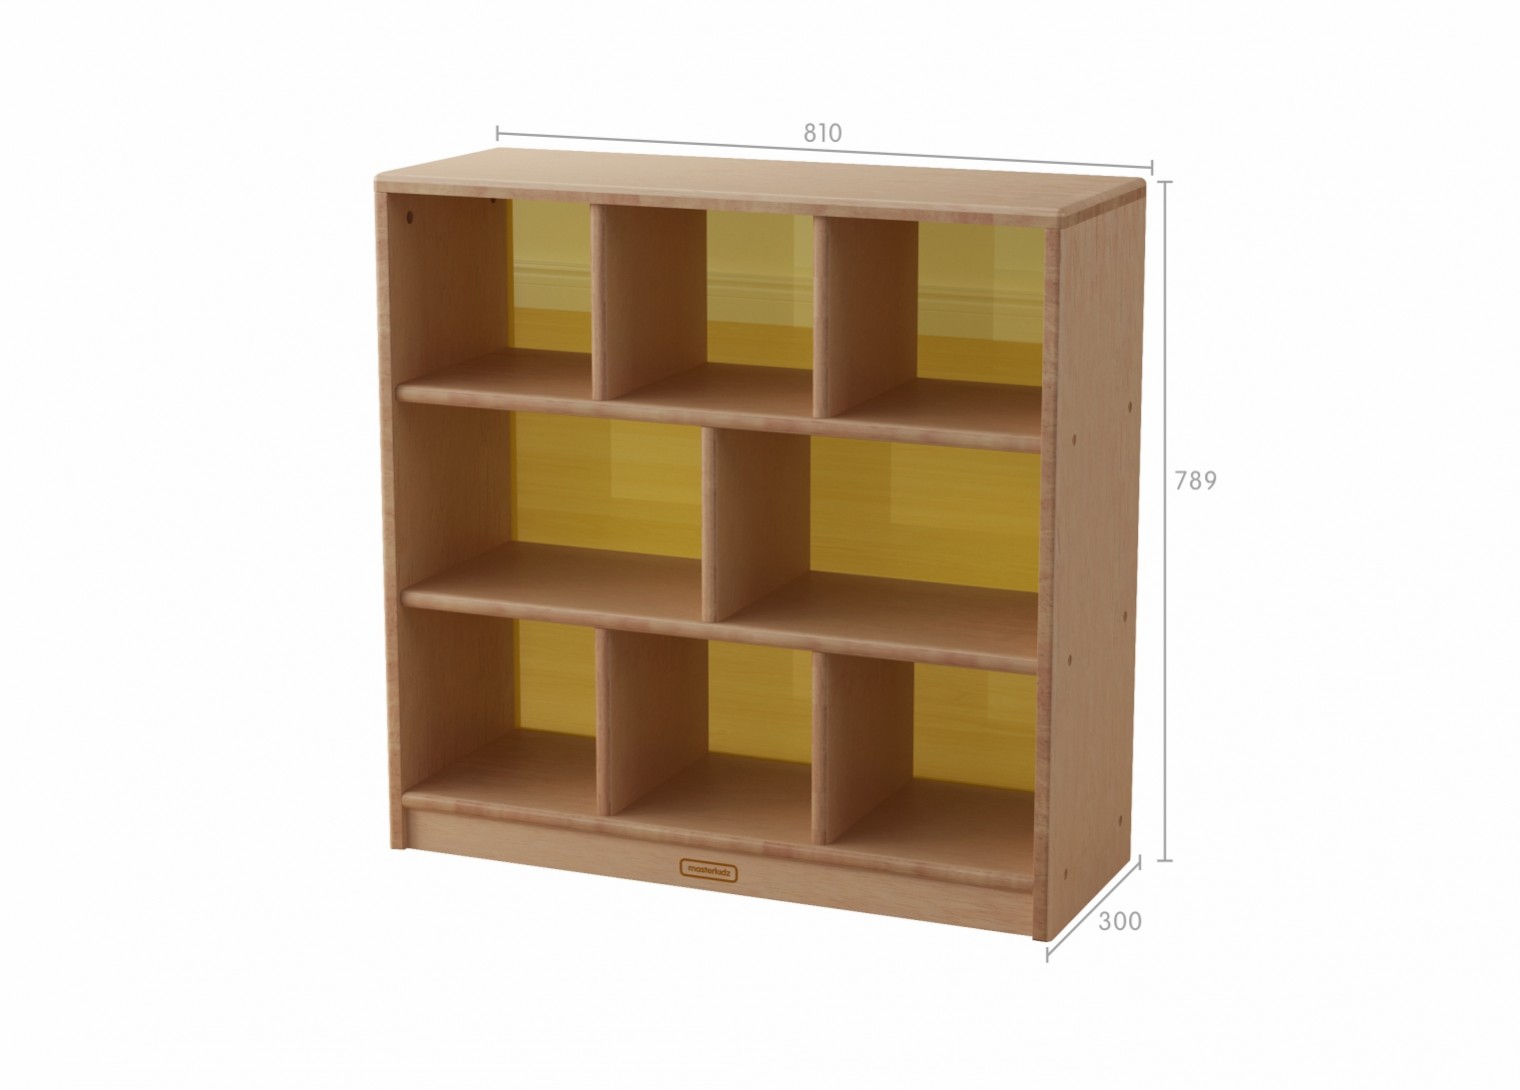 Bern - 789H x 810L Natural Rubber Wood  8-Compartment Shelving Unit - Translucent Yellow Back